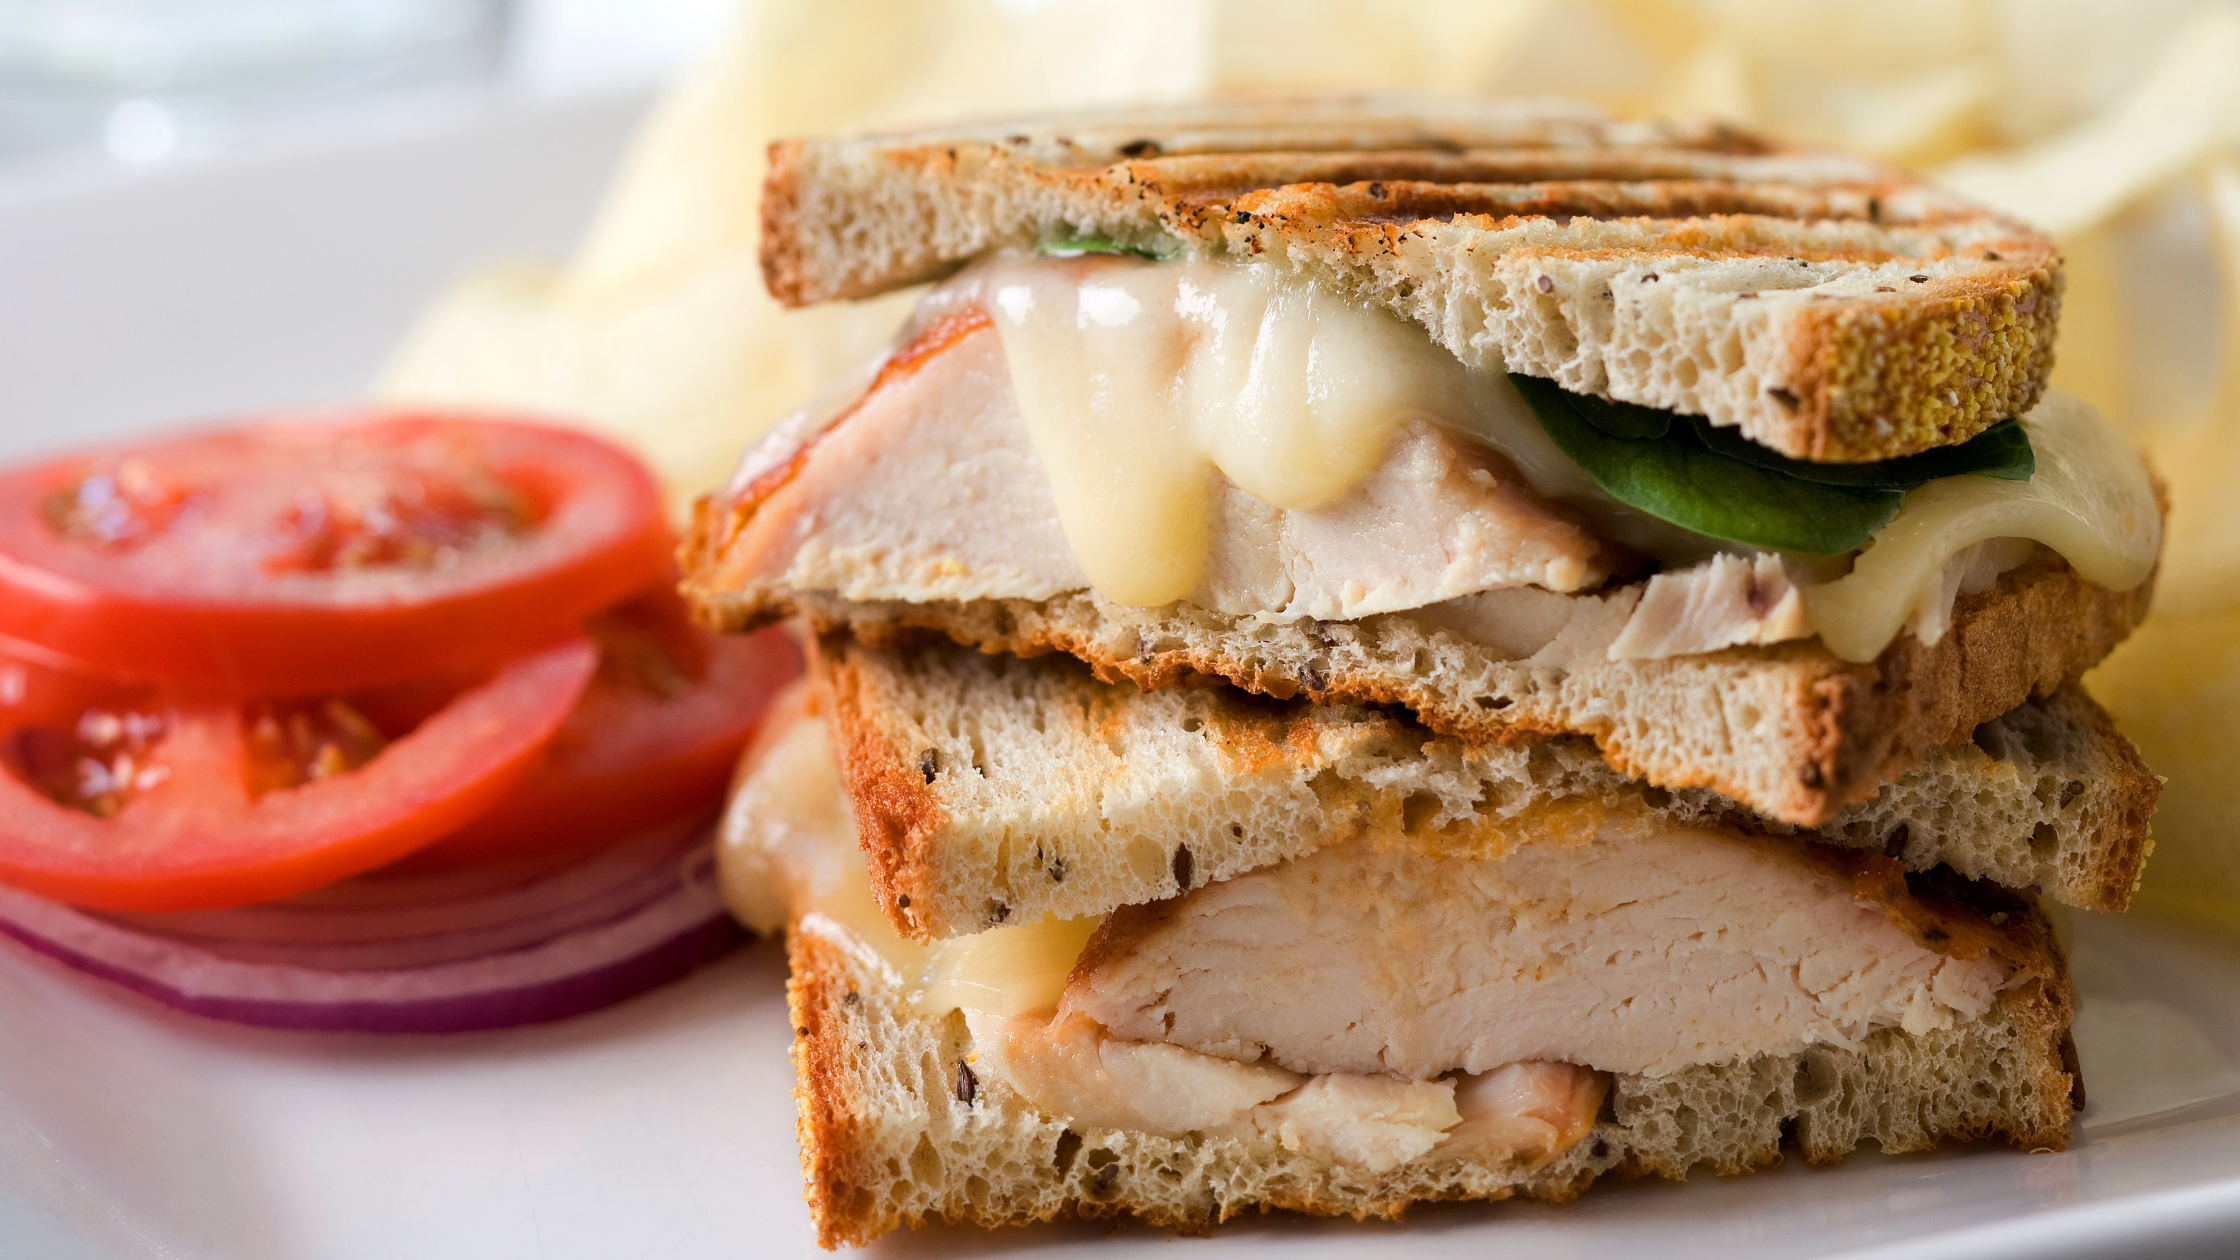 Flavorful Grilled Chicken & Brie Panini 20